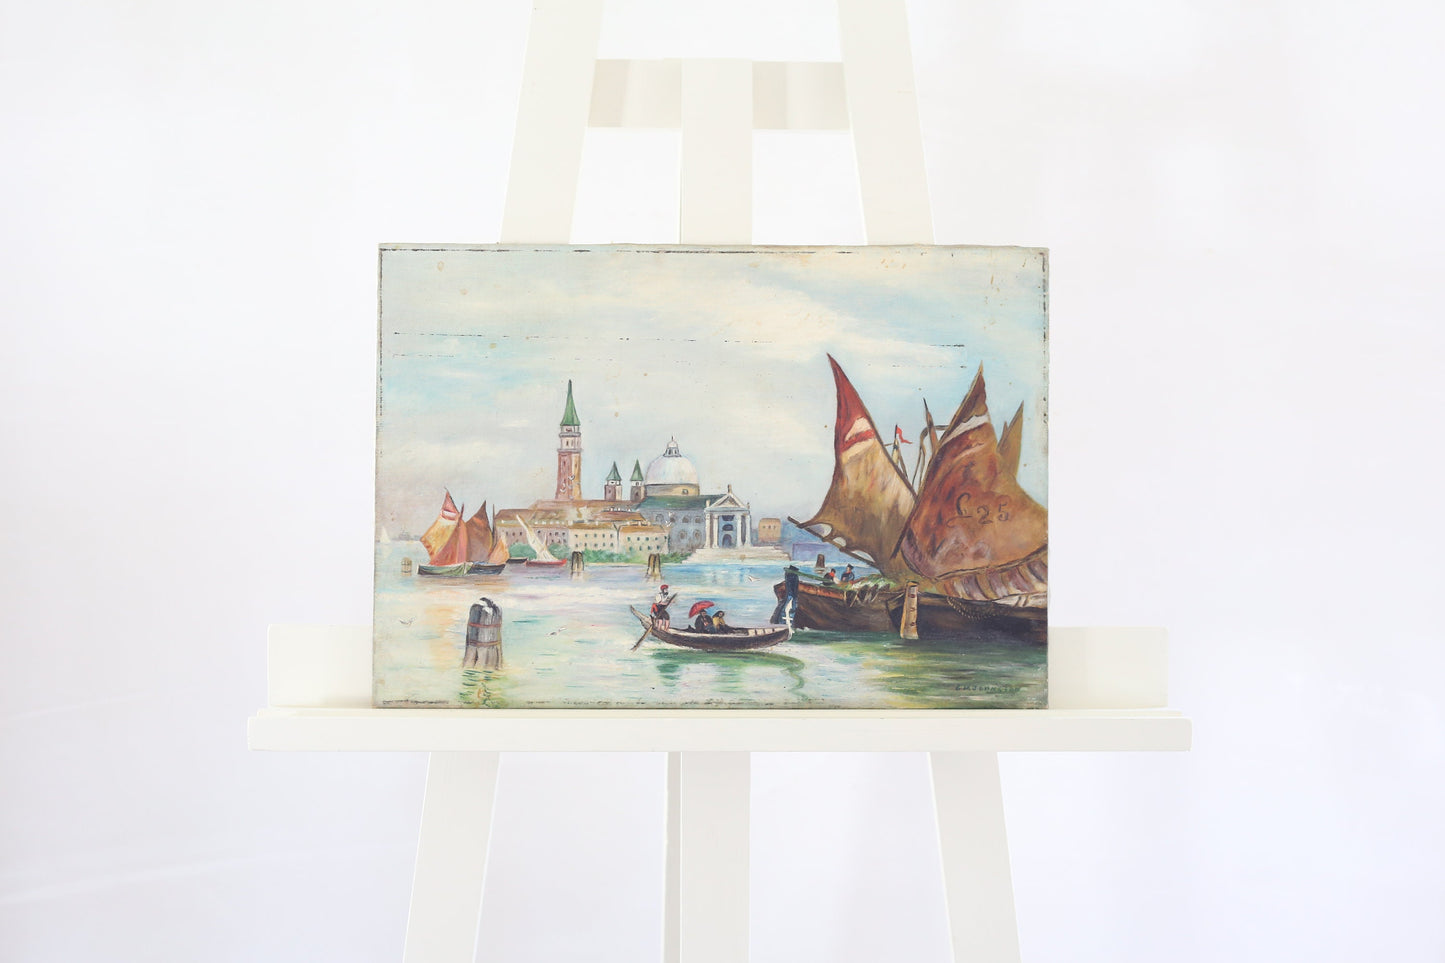 Painting on Canvas Venice Oil on Canvas ca 1900-1910 Signed GM Johnston Original Harbor Nautical Italy Antique Grand Canal Gondolas